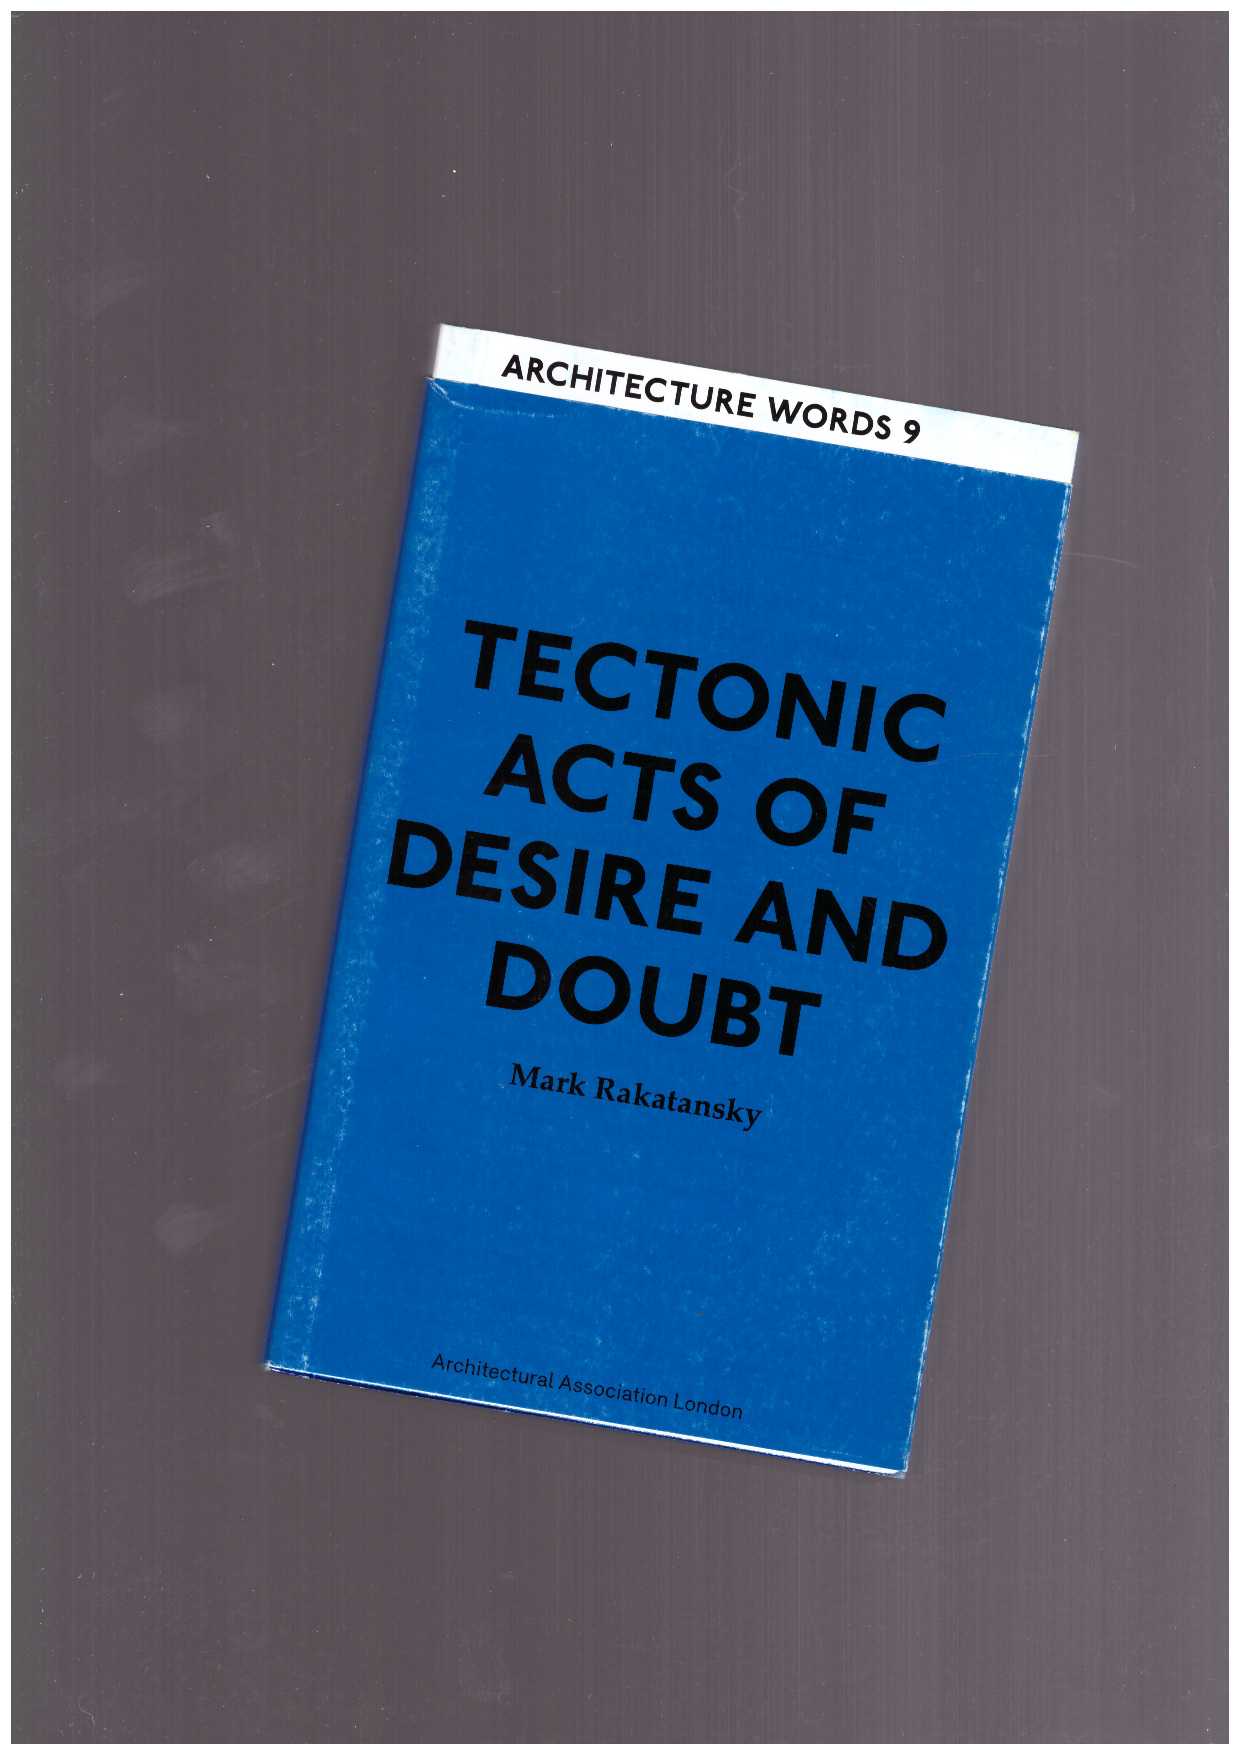 RAKATANSKY, Mark - Architecture Words 9 - Tectonic Acts Of Desire And Doubt